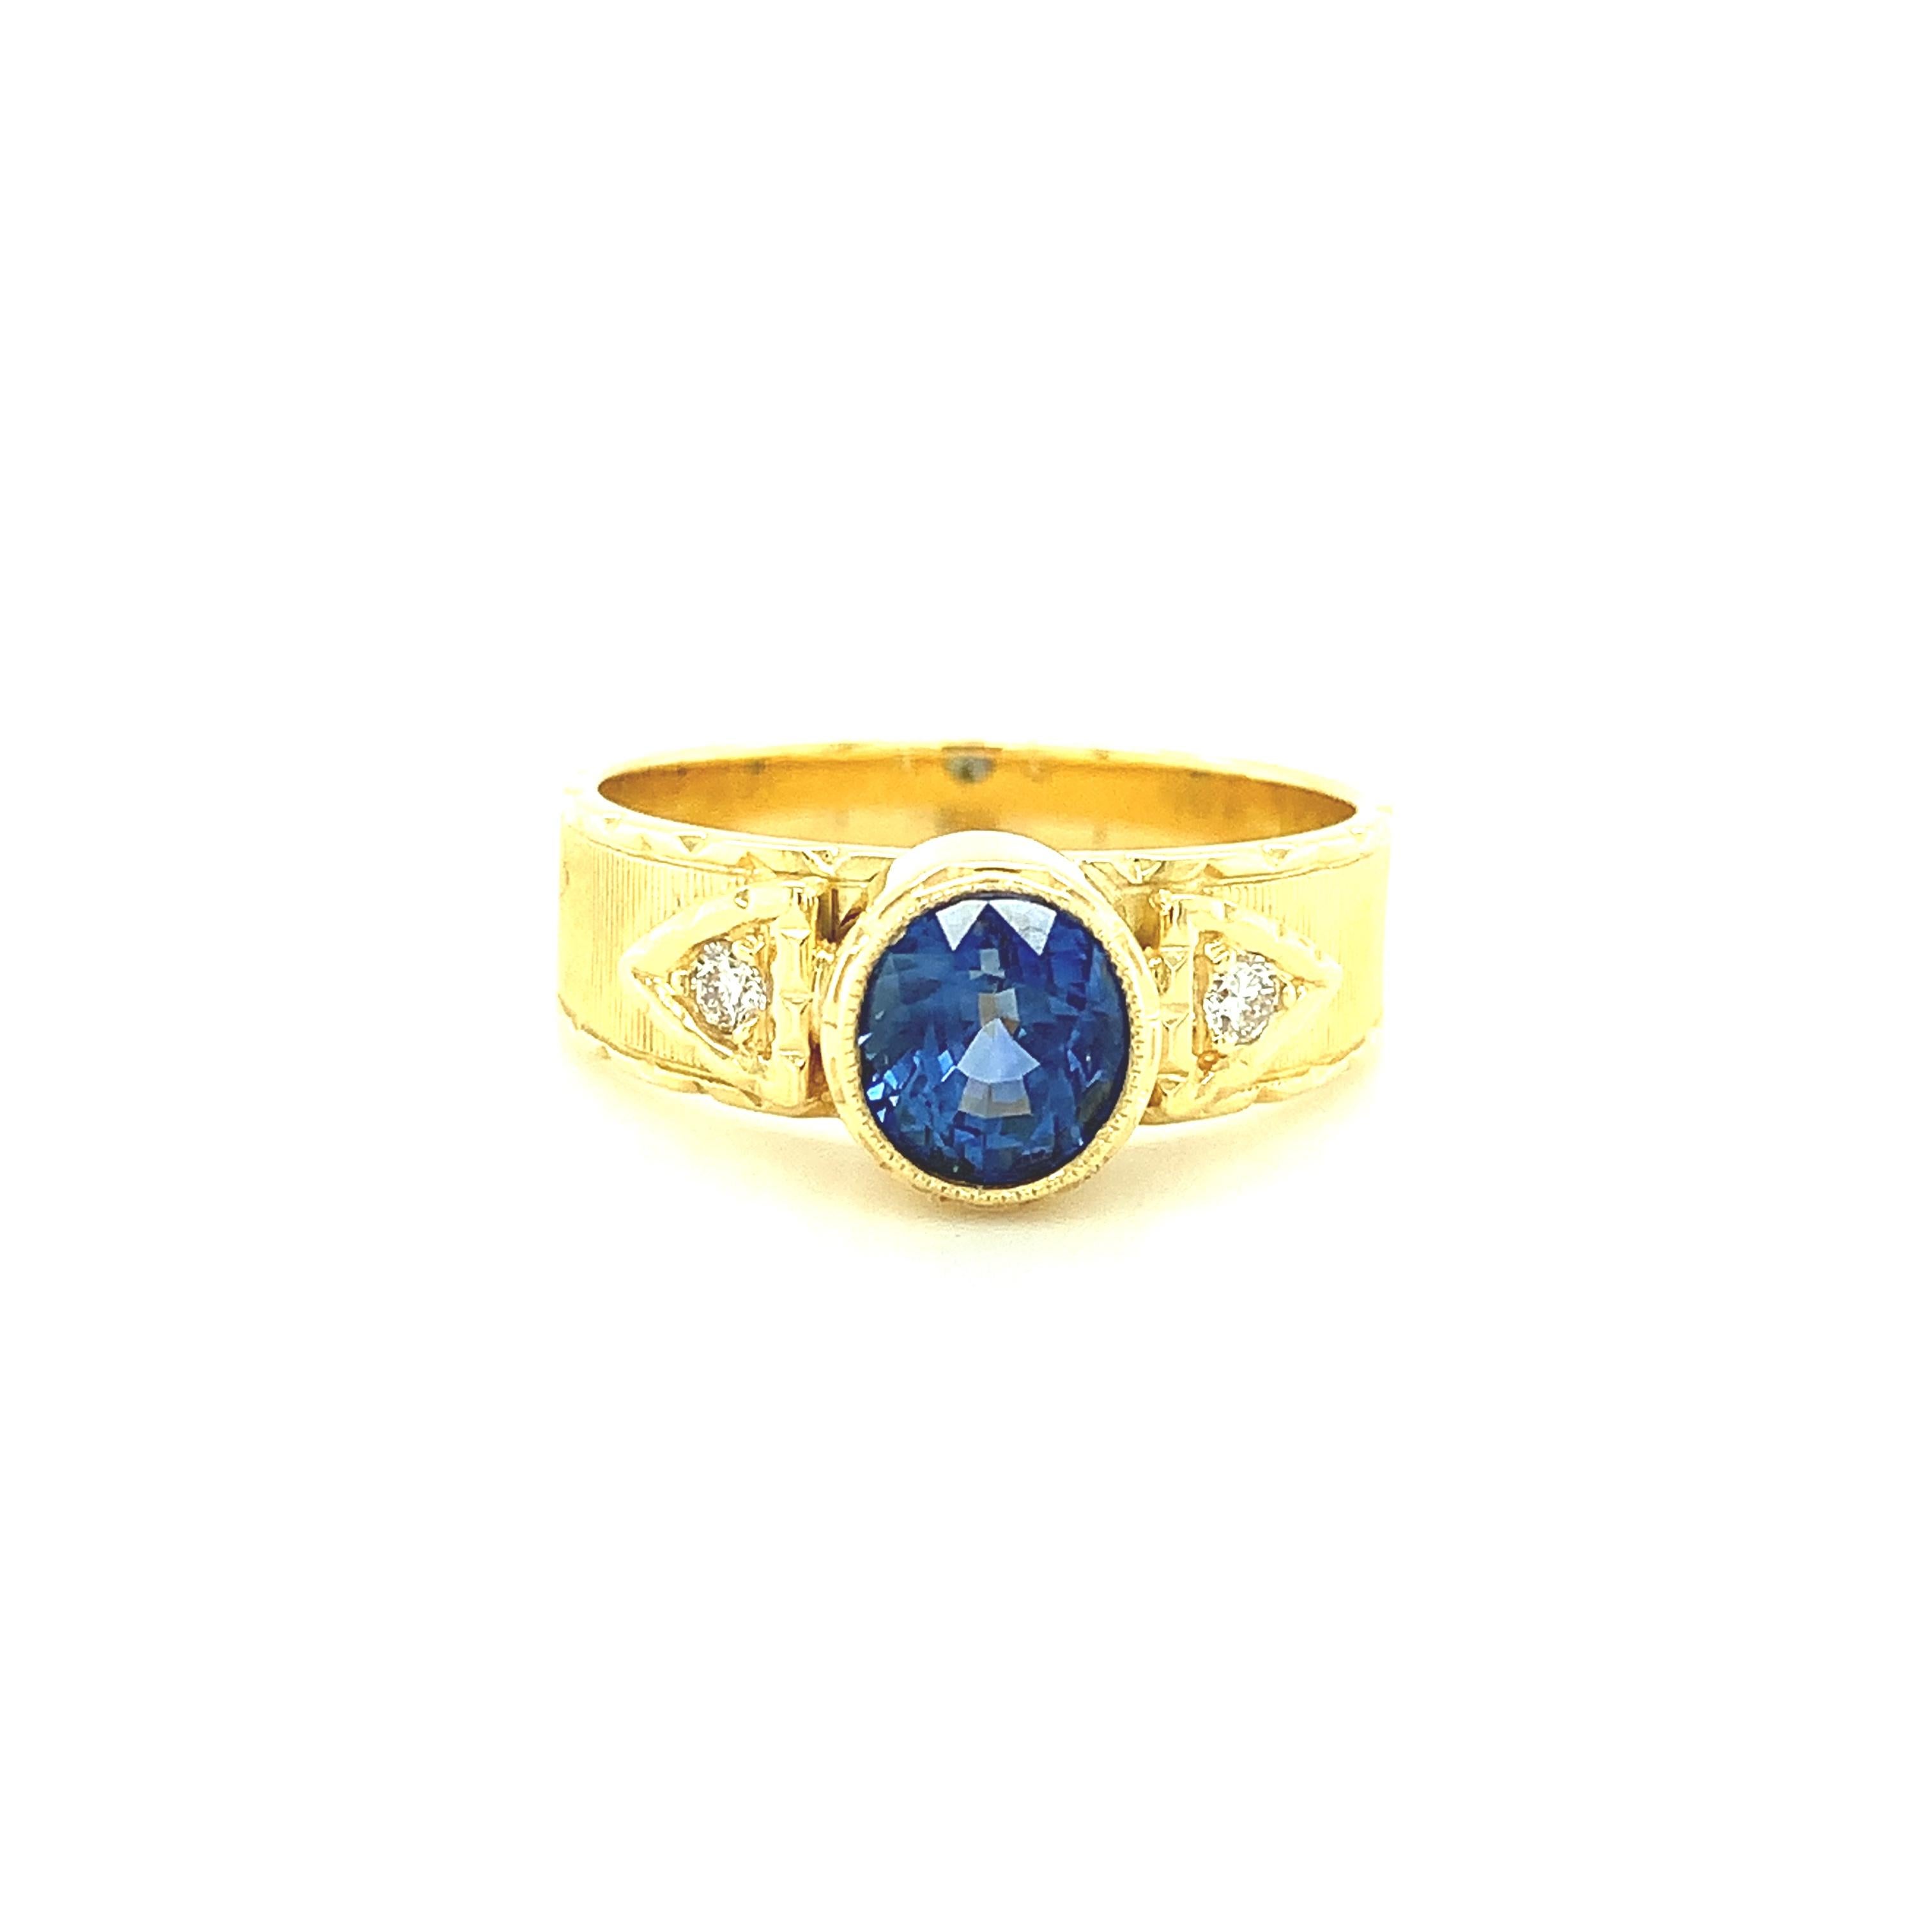 This pretty ring features a lovely, bright blue sapphire that has been set in a beautifully handmade and intricately detailed 18k yellow gold bezel. The oval-shaped brilliant sapphire has gorgeous medium blue color and is accented on either side